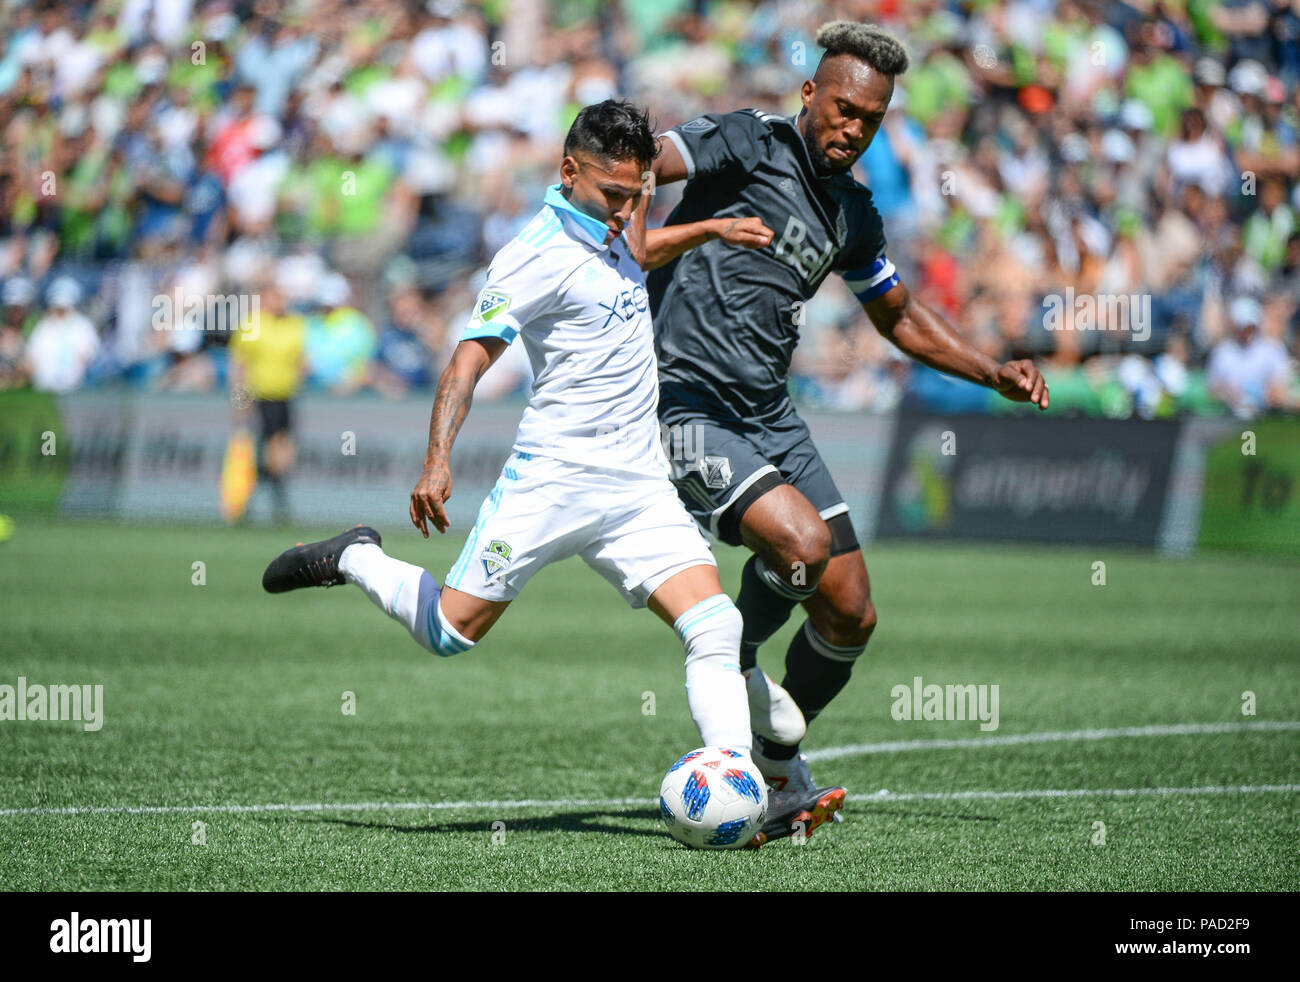 Seattle, Washington, USA. 21st July, 2018. RAUL RUIDIAZ (9) takes a shot against the defense of KENDALL WASTON (4) as the Vancouver Whitecaps visit the Seattle Sounders for an MLS match at Century Link Field in Seattle, WA. Credit: Jeff Halstead/ZUMA Wire/Alamy Live News Stock Photo